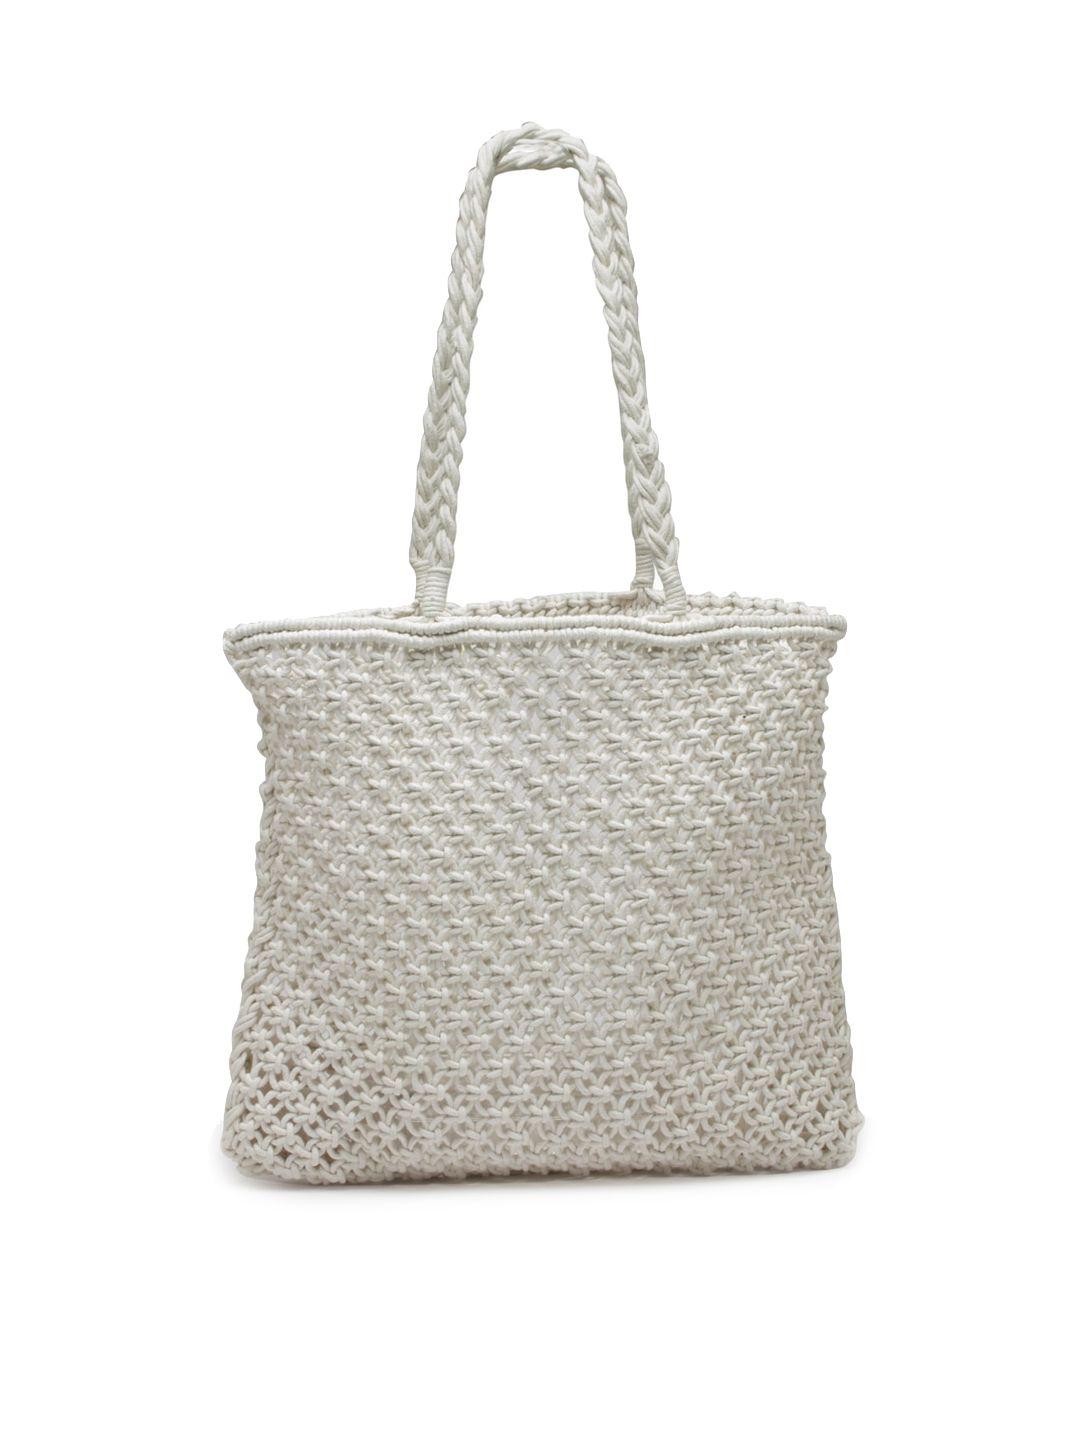 arrabi white geometric textured oversized structured shoulder bag with tasselled